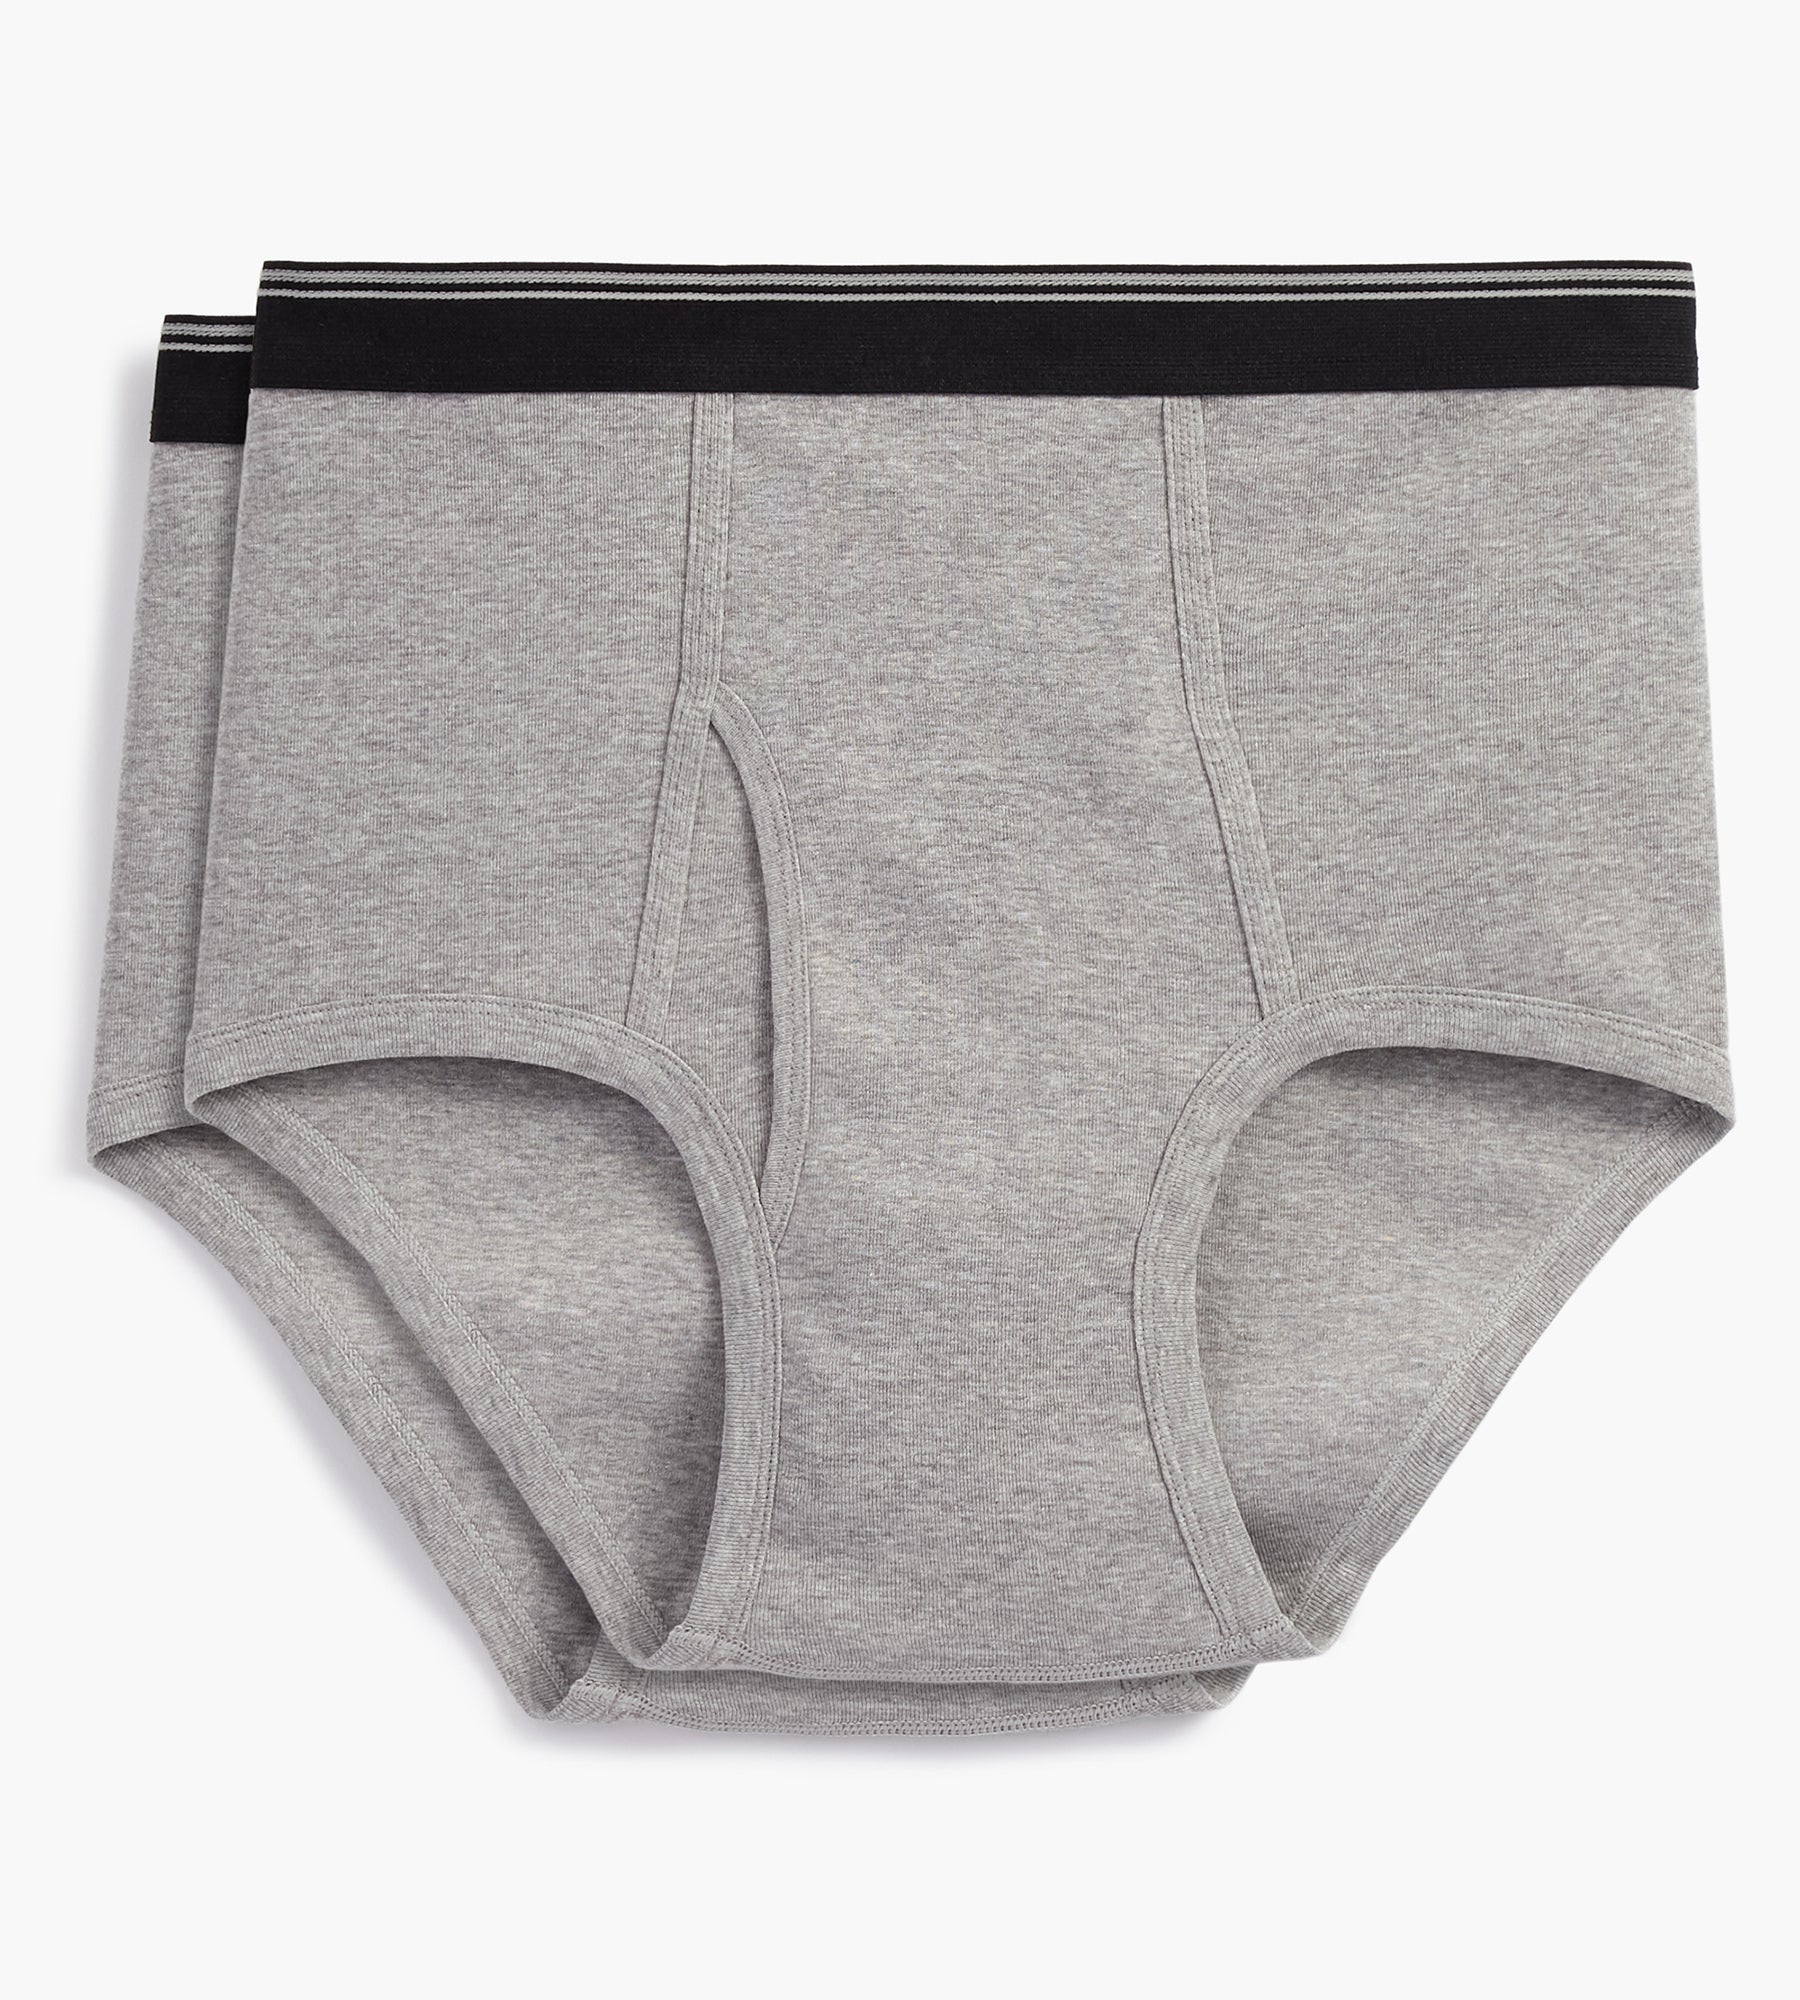 MEN'S BIG AND TALL UNDERWEAR - Big and Tall London's Menswear - The Best in  Big and Tall